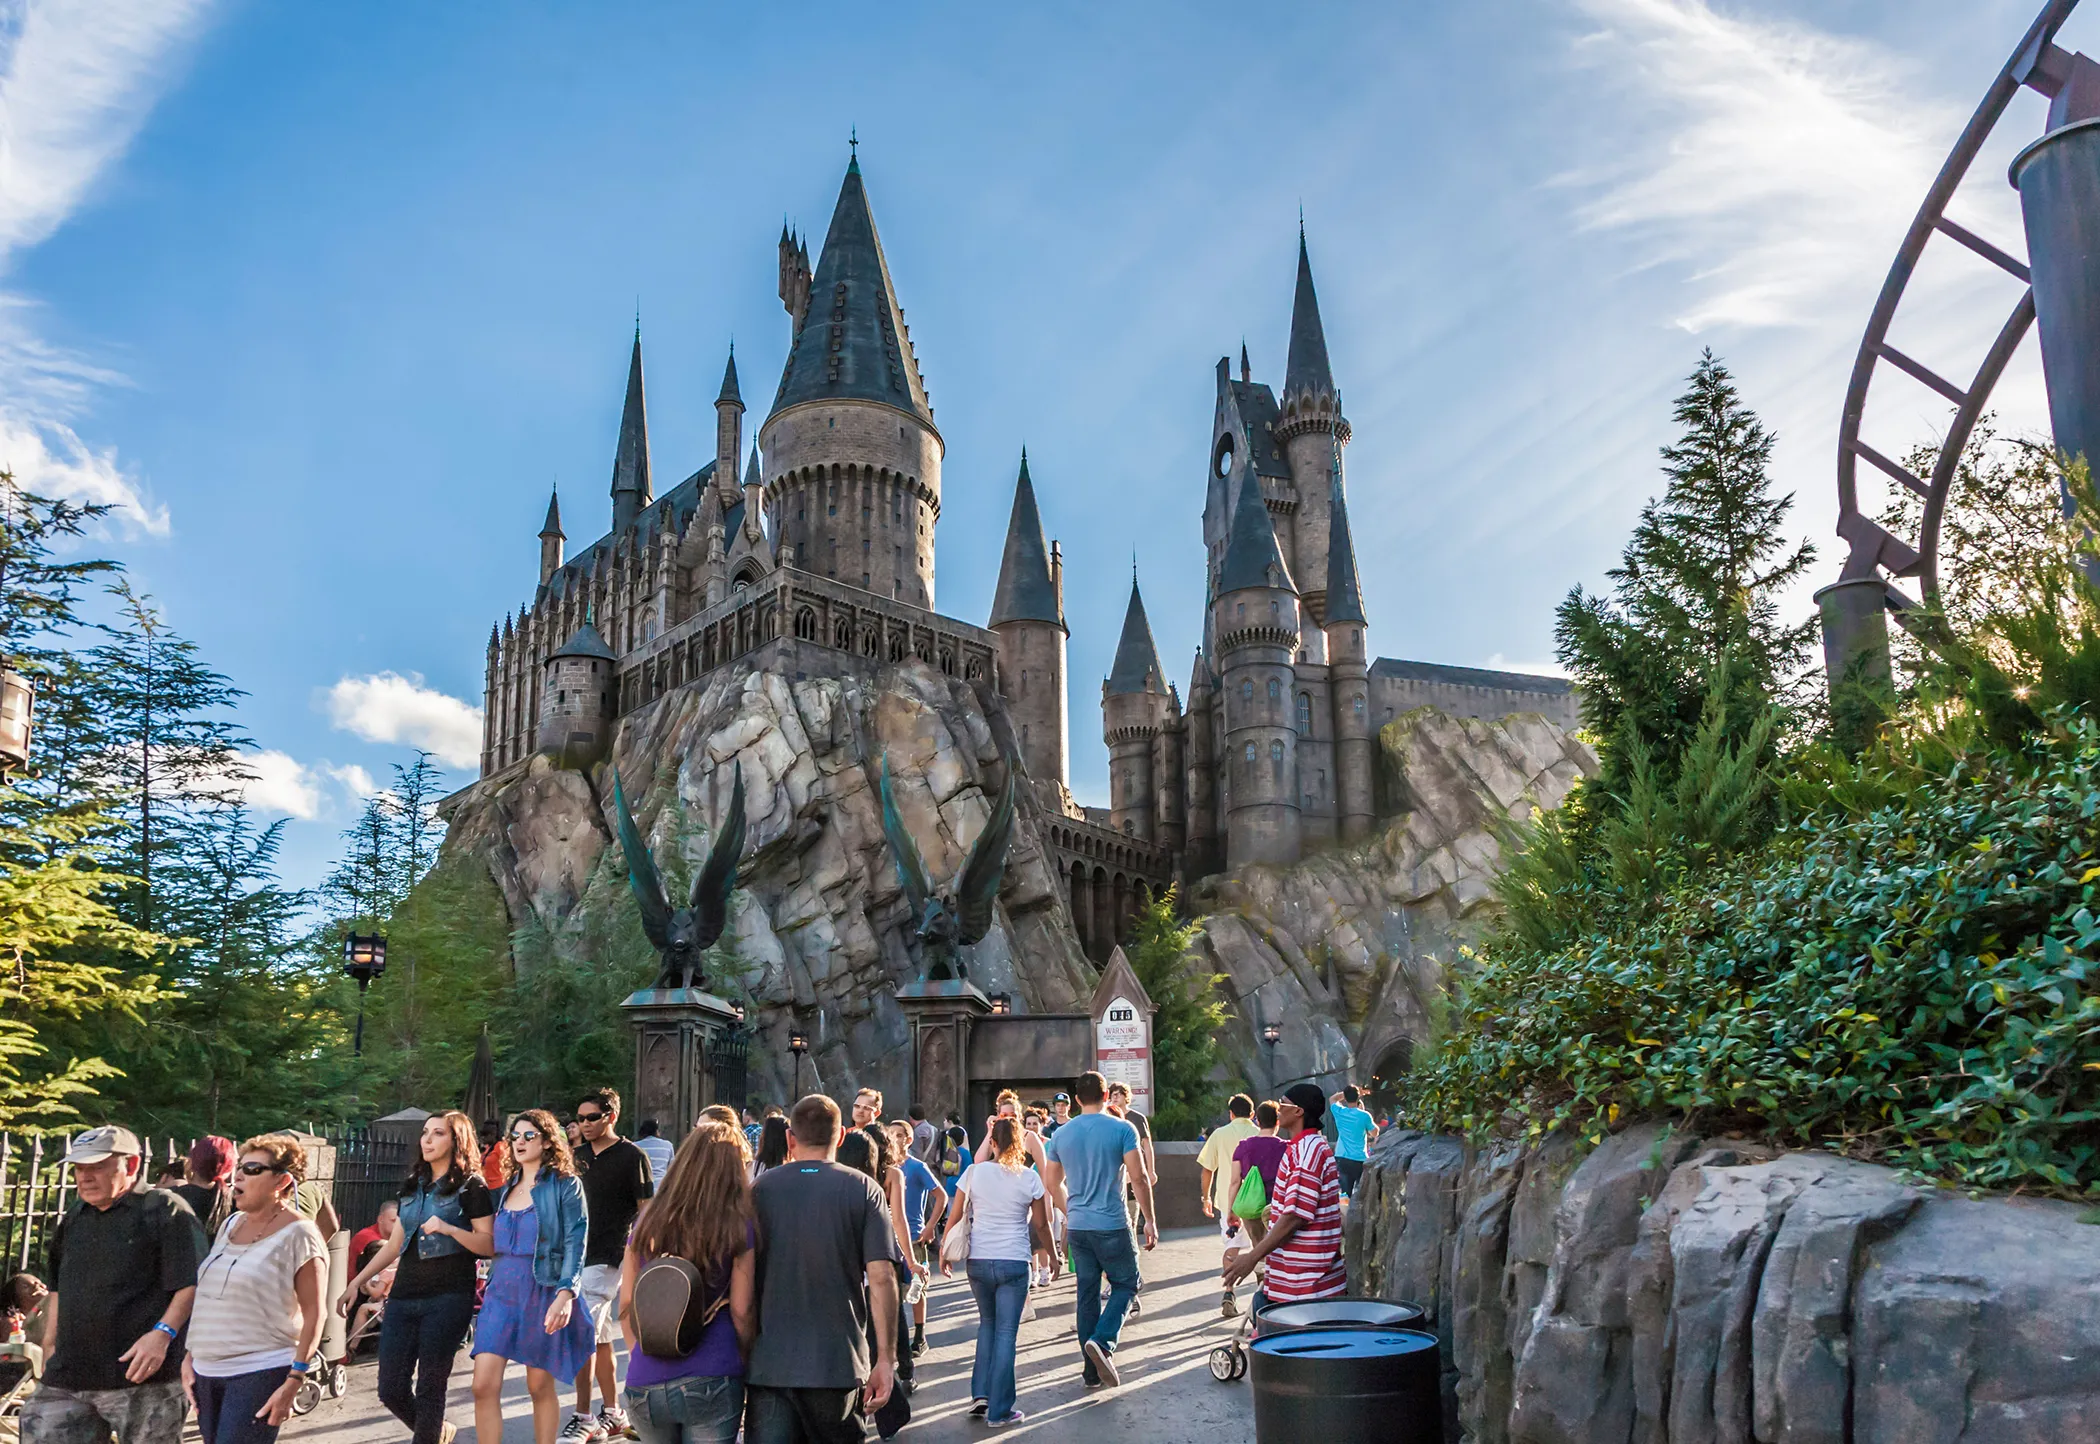 How to Do Universal Studios and Islands of Adventure in One Day  Universal  studios orlando trip, Islands of adventure, Universal islands of adventure